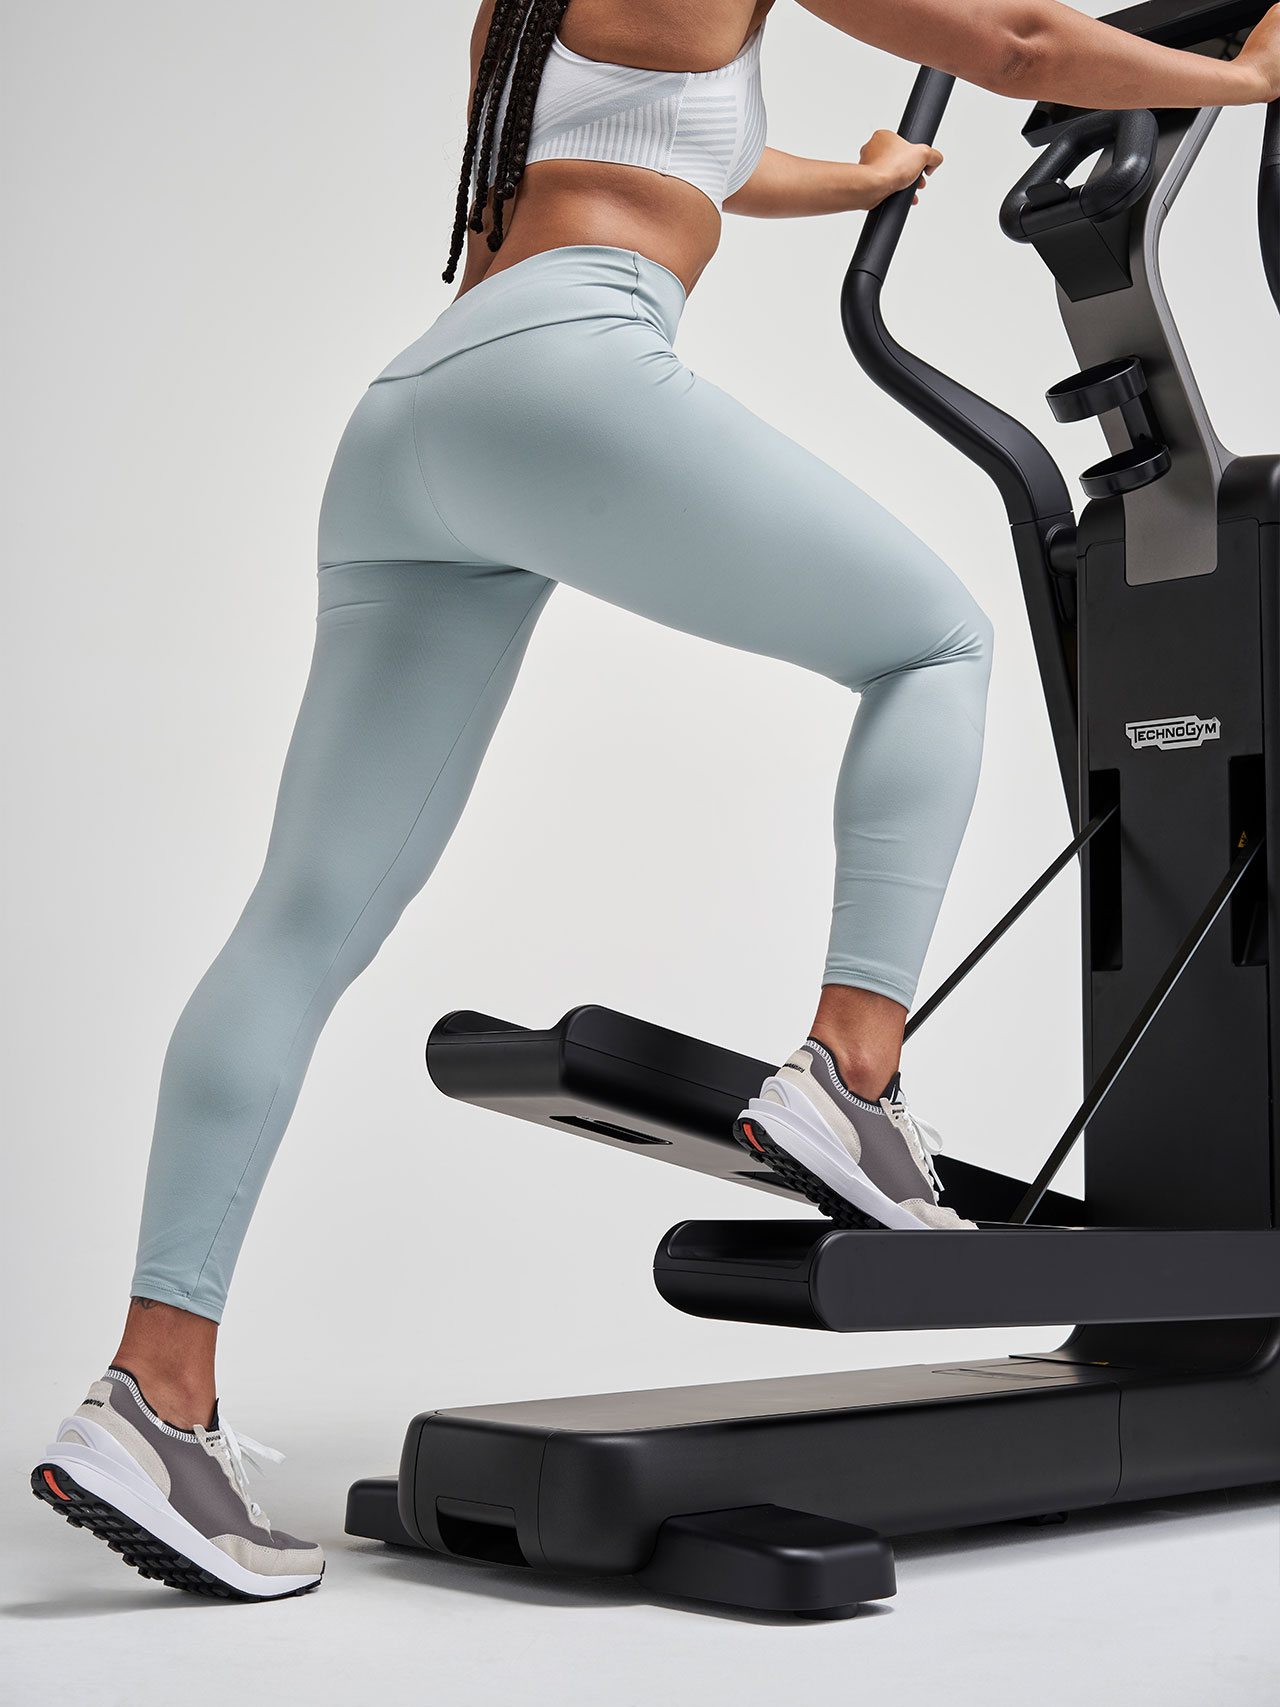 elliptical-feature-5-easy-on